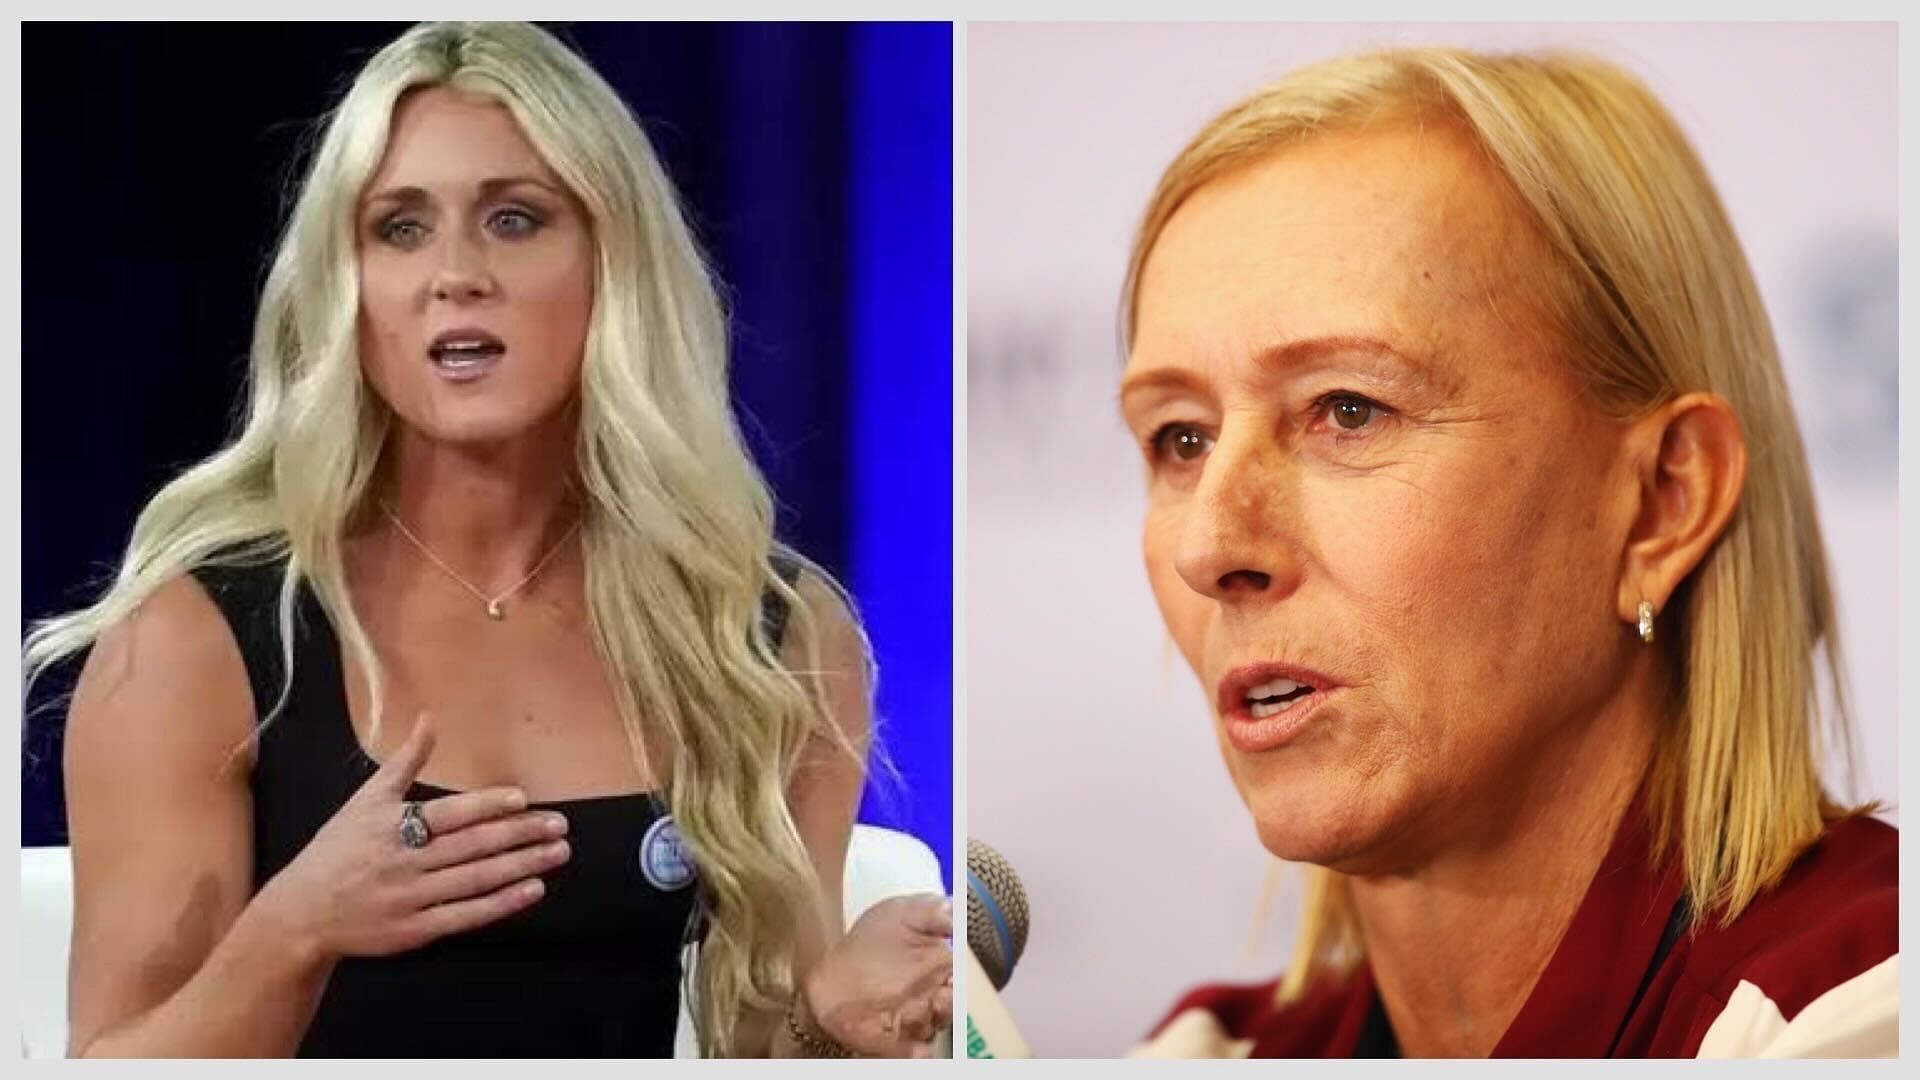 Riley Gaines (L) and Martina Navratilova expressed outrage at Roanoke College